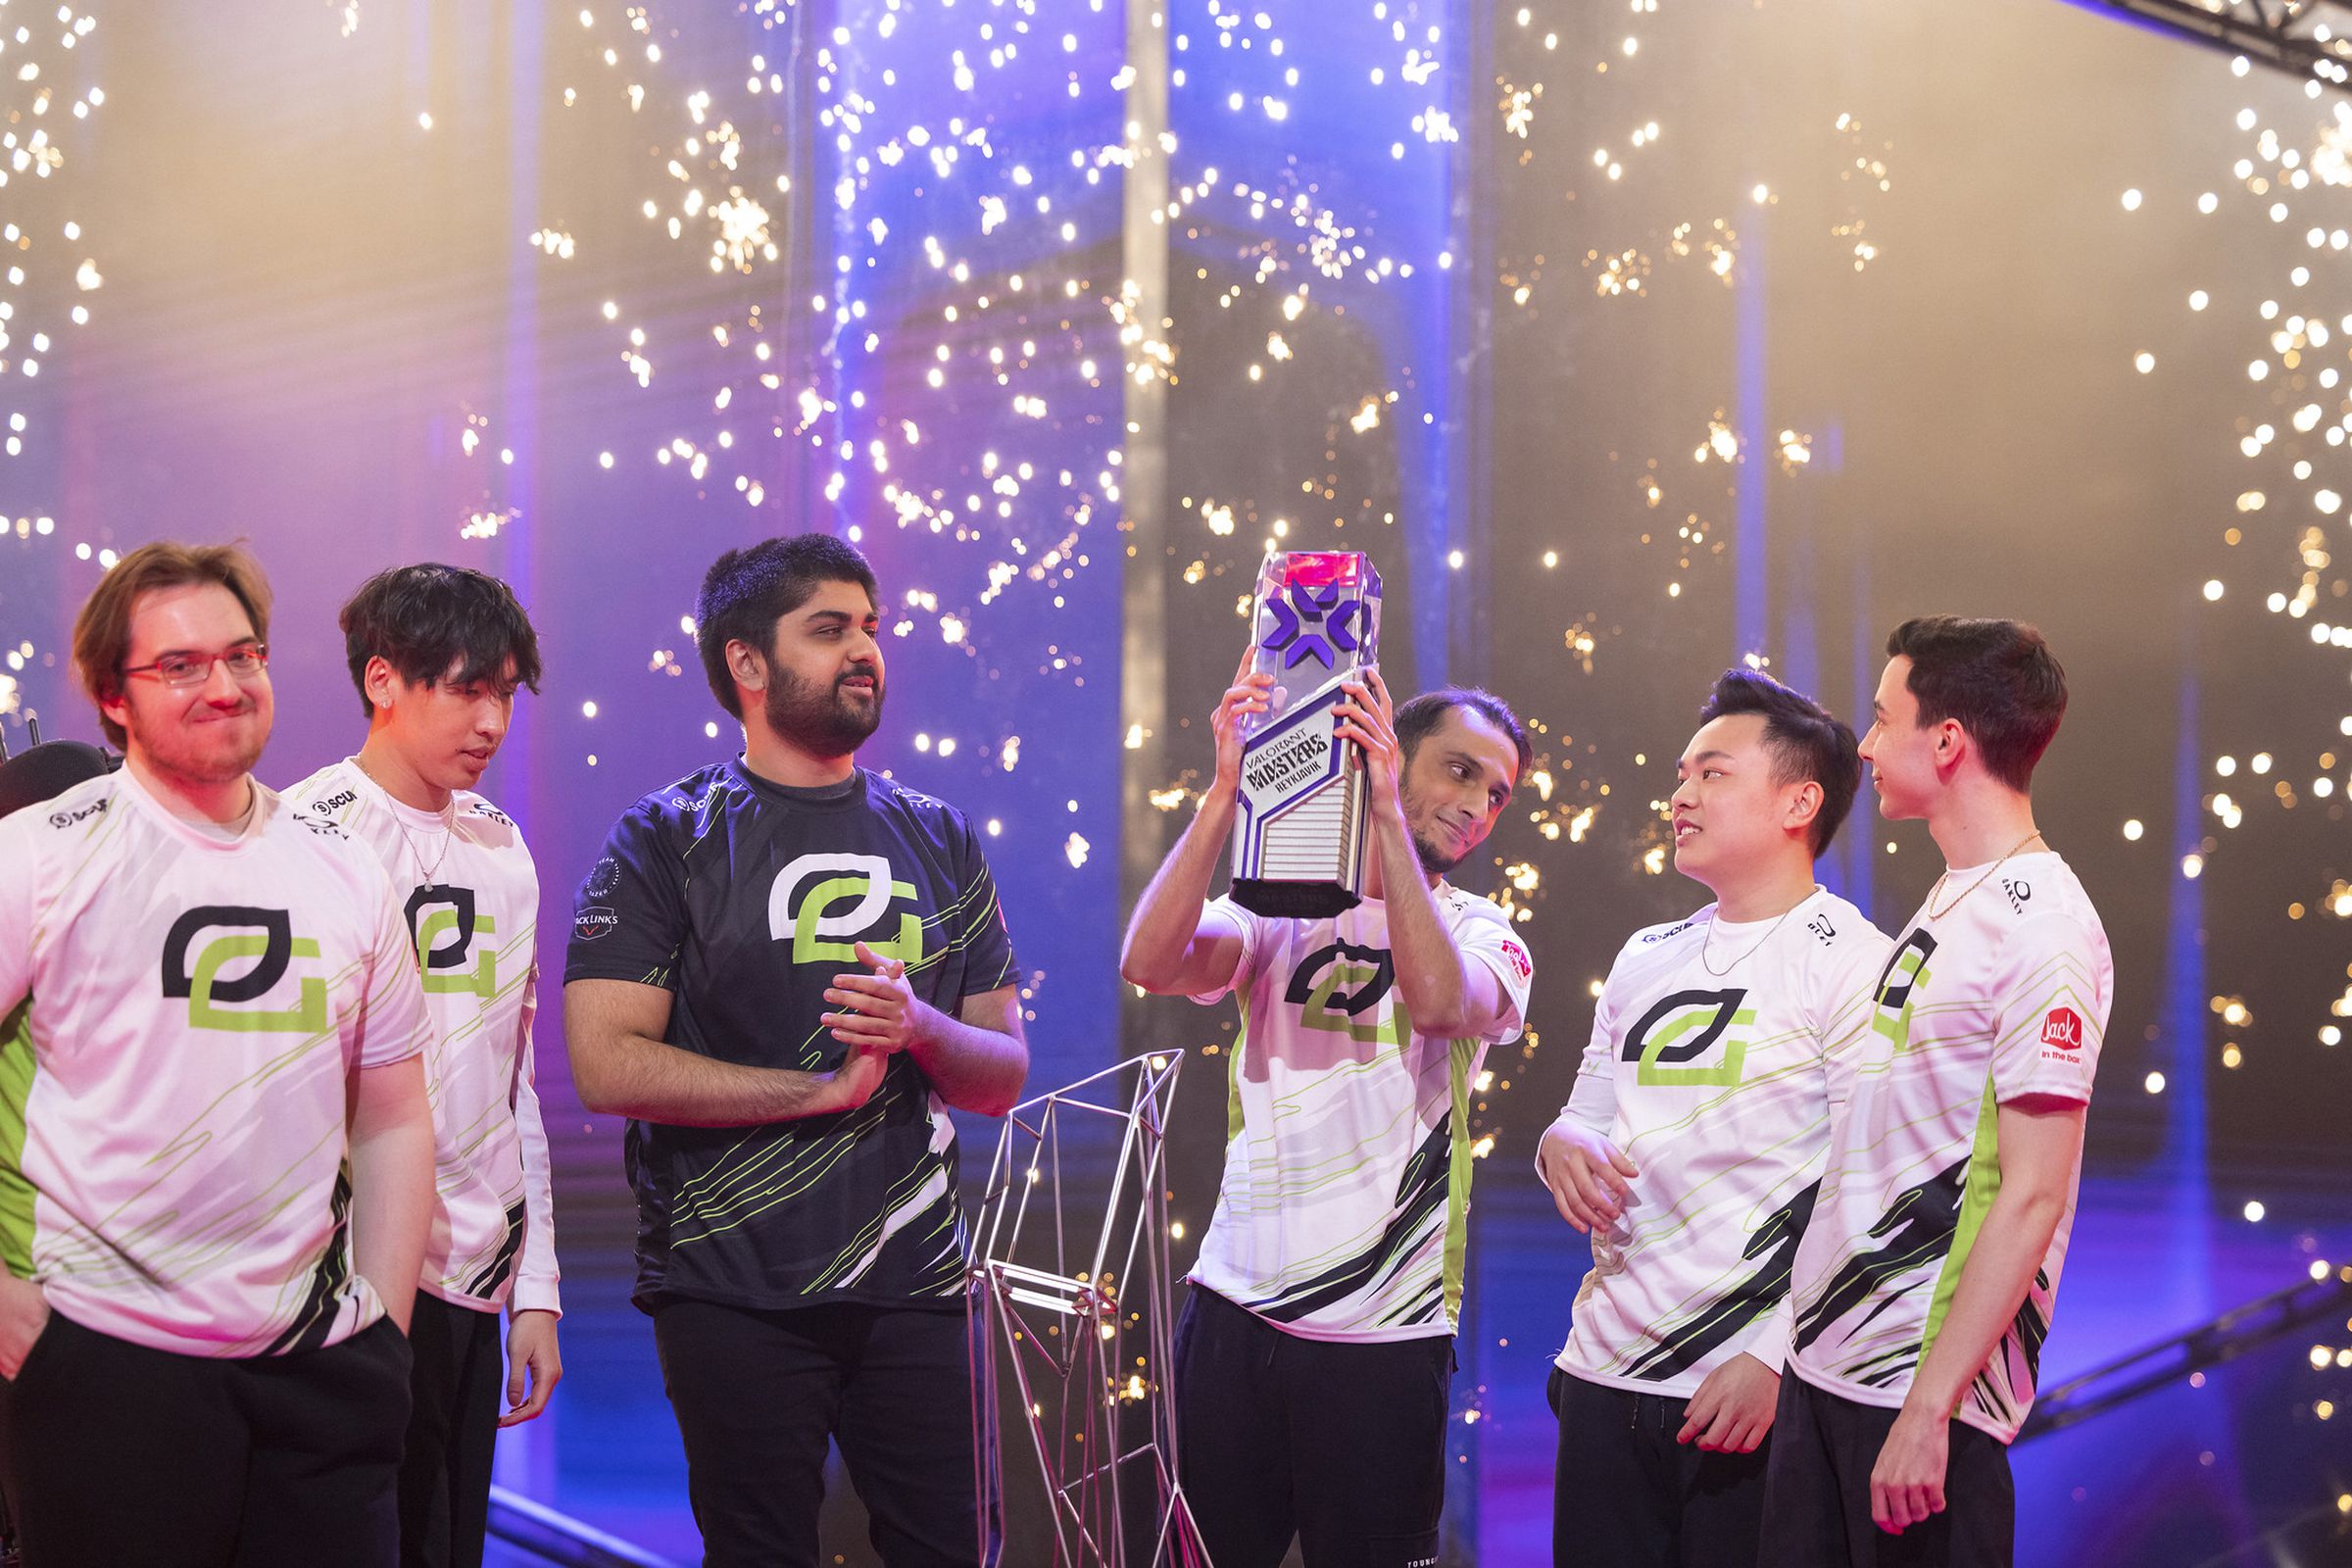 Optic Gaming winning the Valorant Masters Finals in Reykjavik, Iceland.